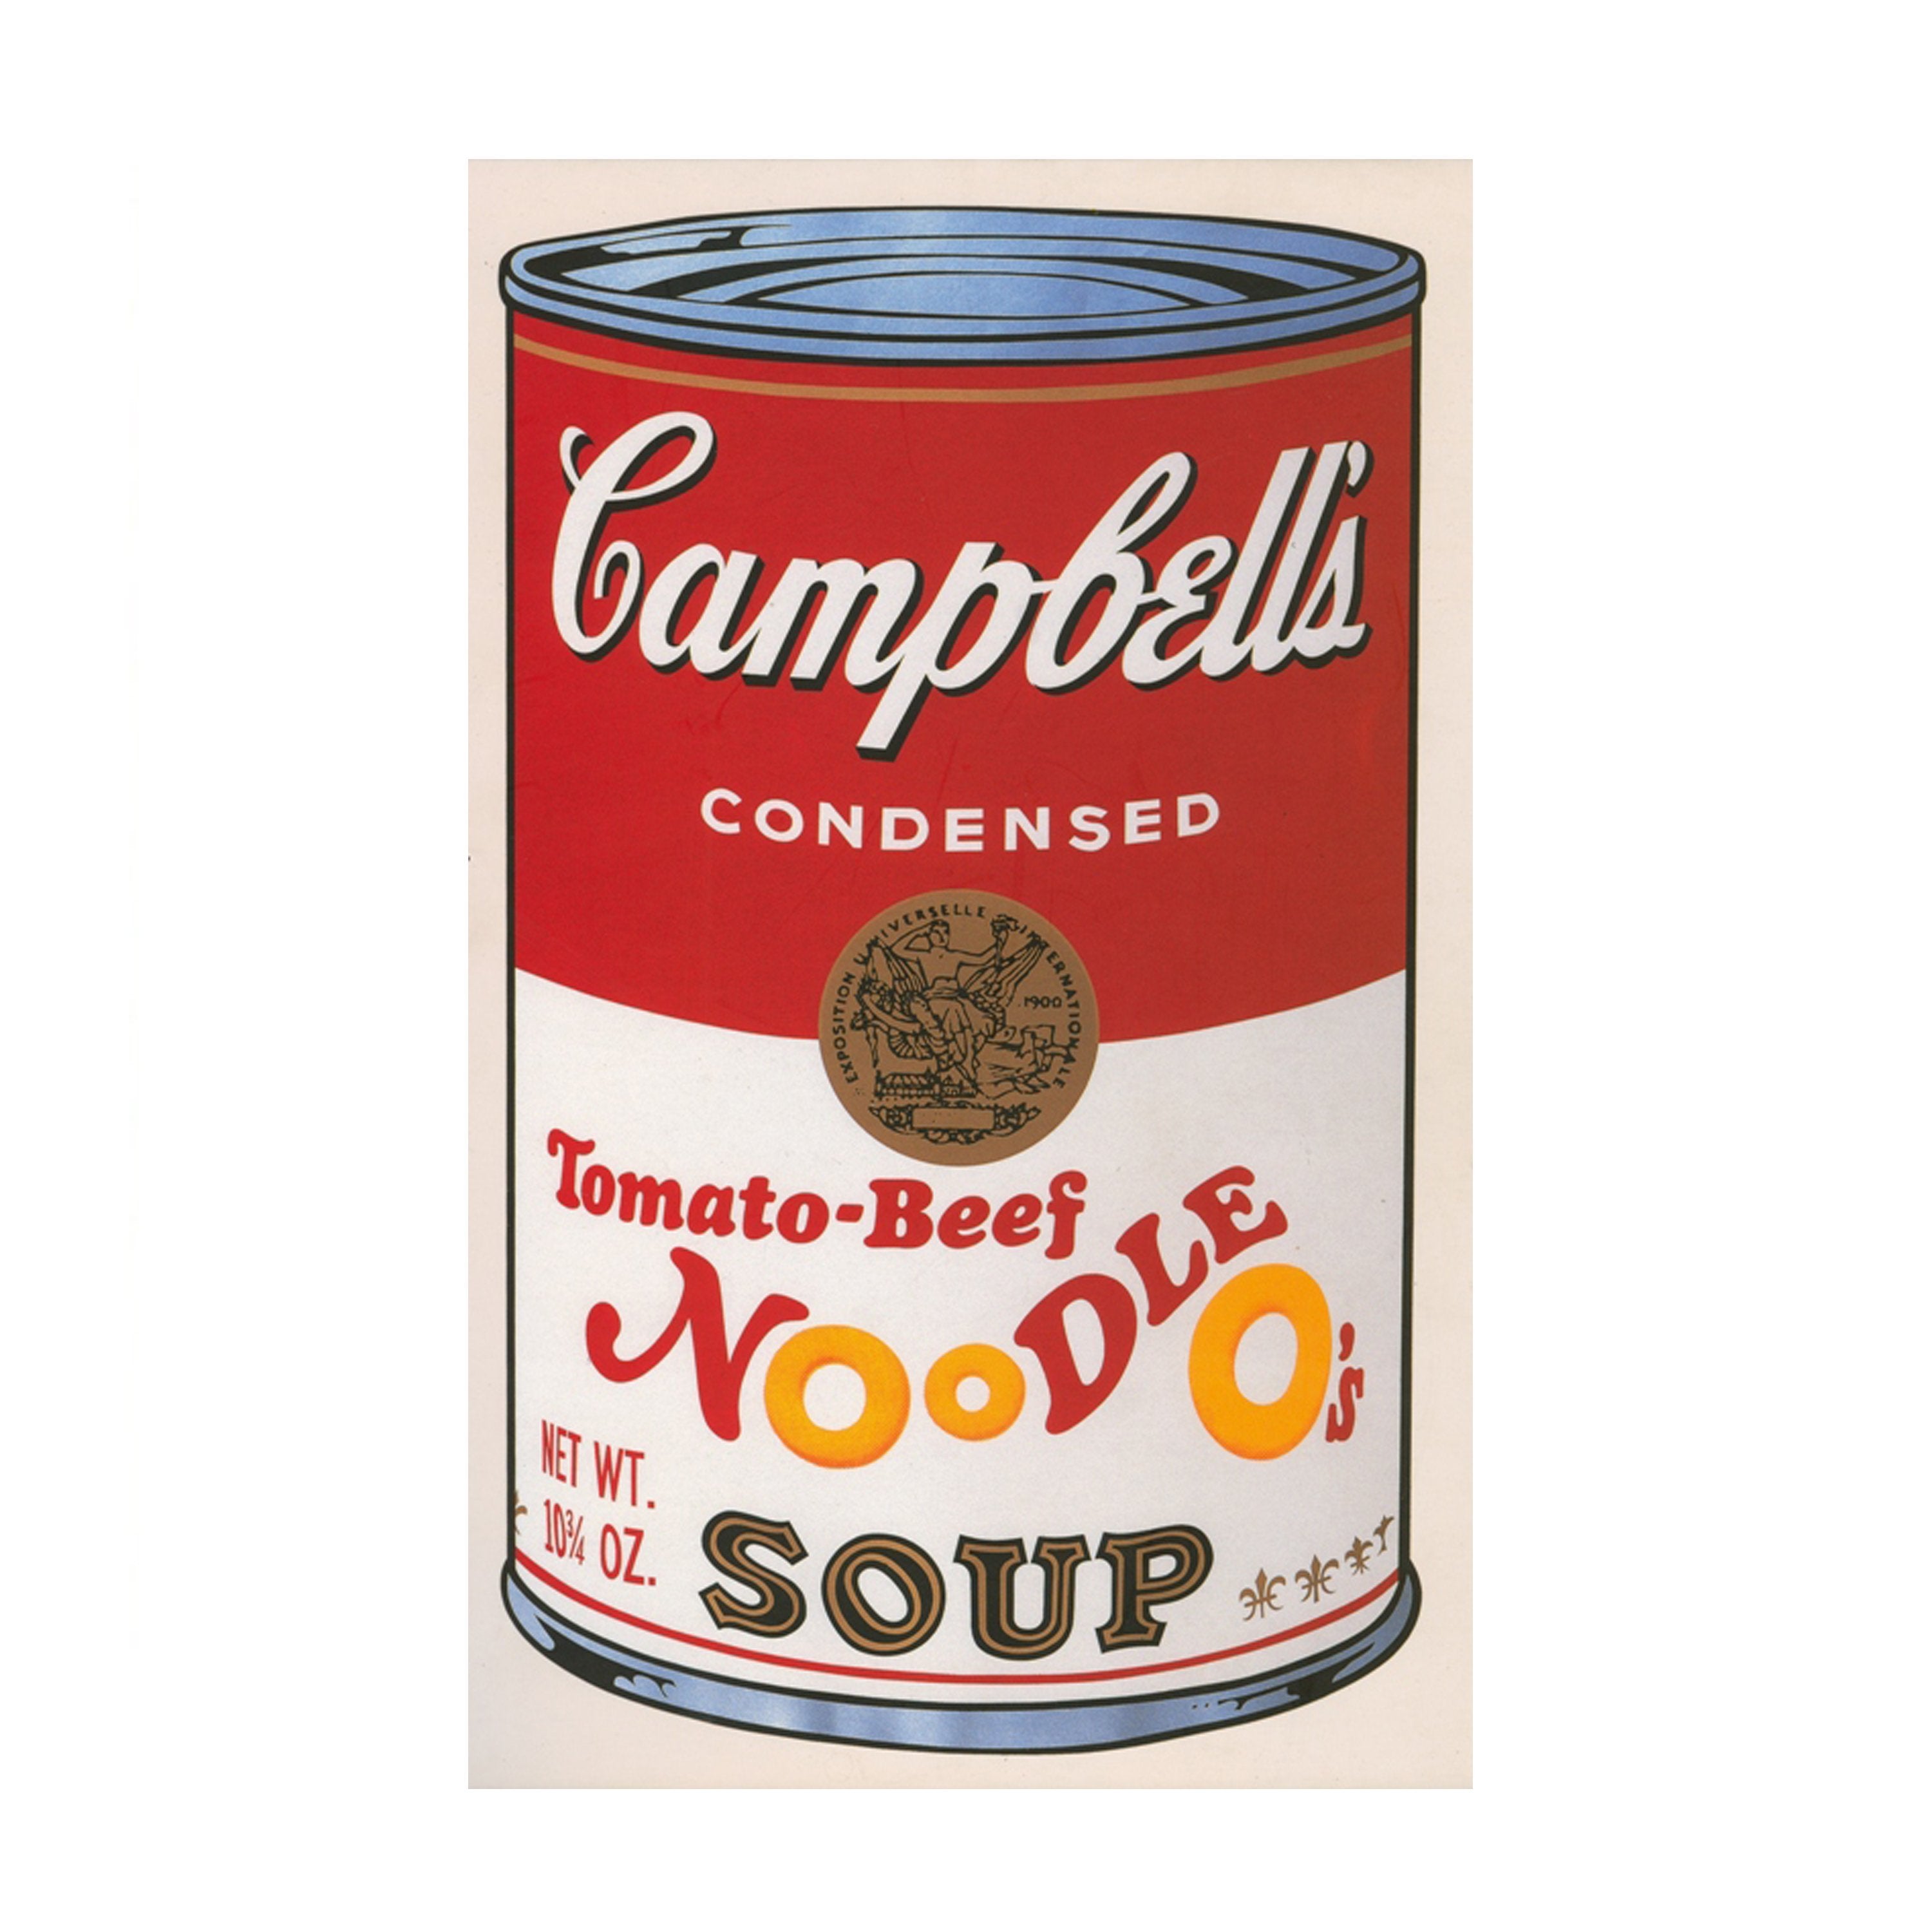 Tomato-Beef Campbell's Soup II, Andy Warhol - ONEROOM